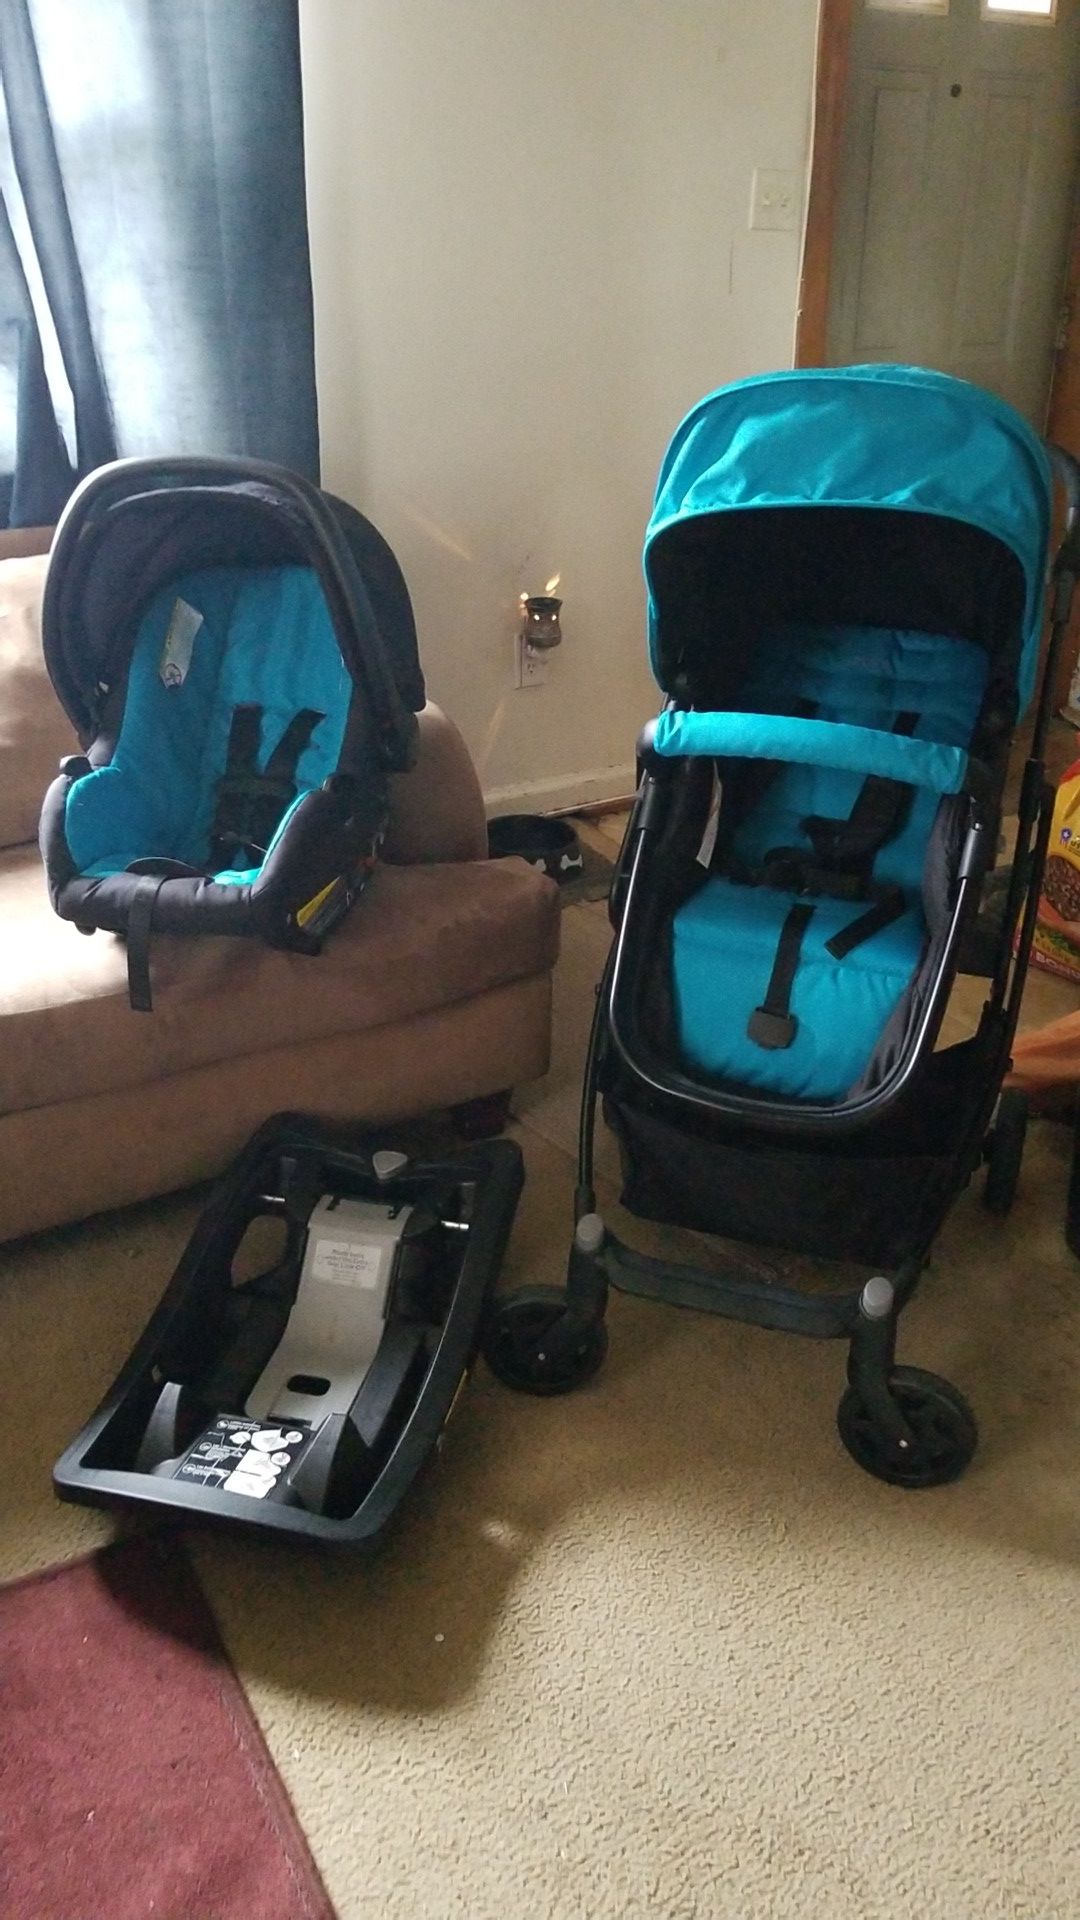 urbini stroller and car seat interchangeable for an infant stroller for infant or toddler